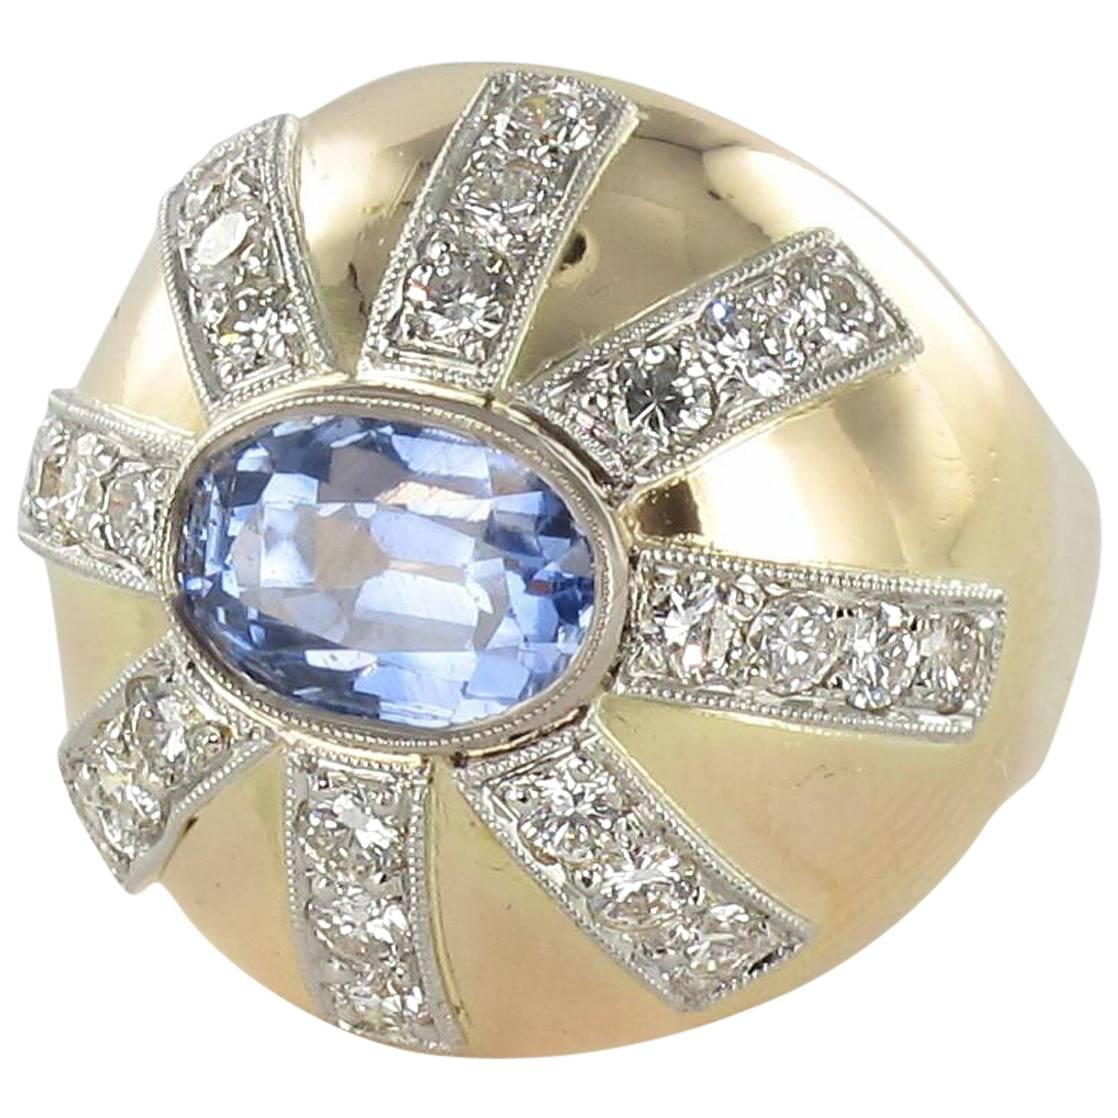 Ring in 18 carat yellow gold and platinium, owl hallmark. 

This splendid ring is composed of a golden dome which is set with an oval sapphire with a milgrain border. This is surrounded by an 8 branch star motif, each branch featuring 3 brilliant